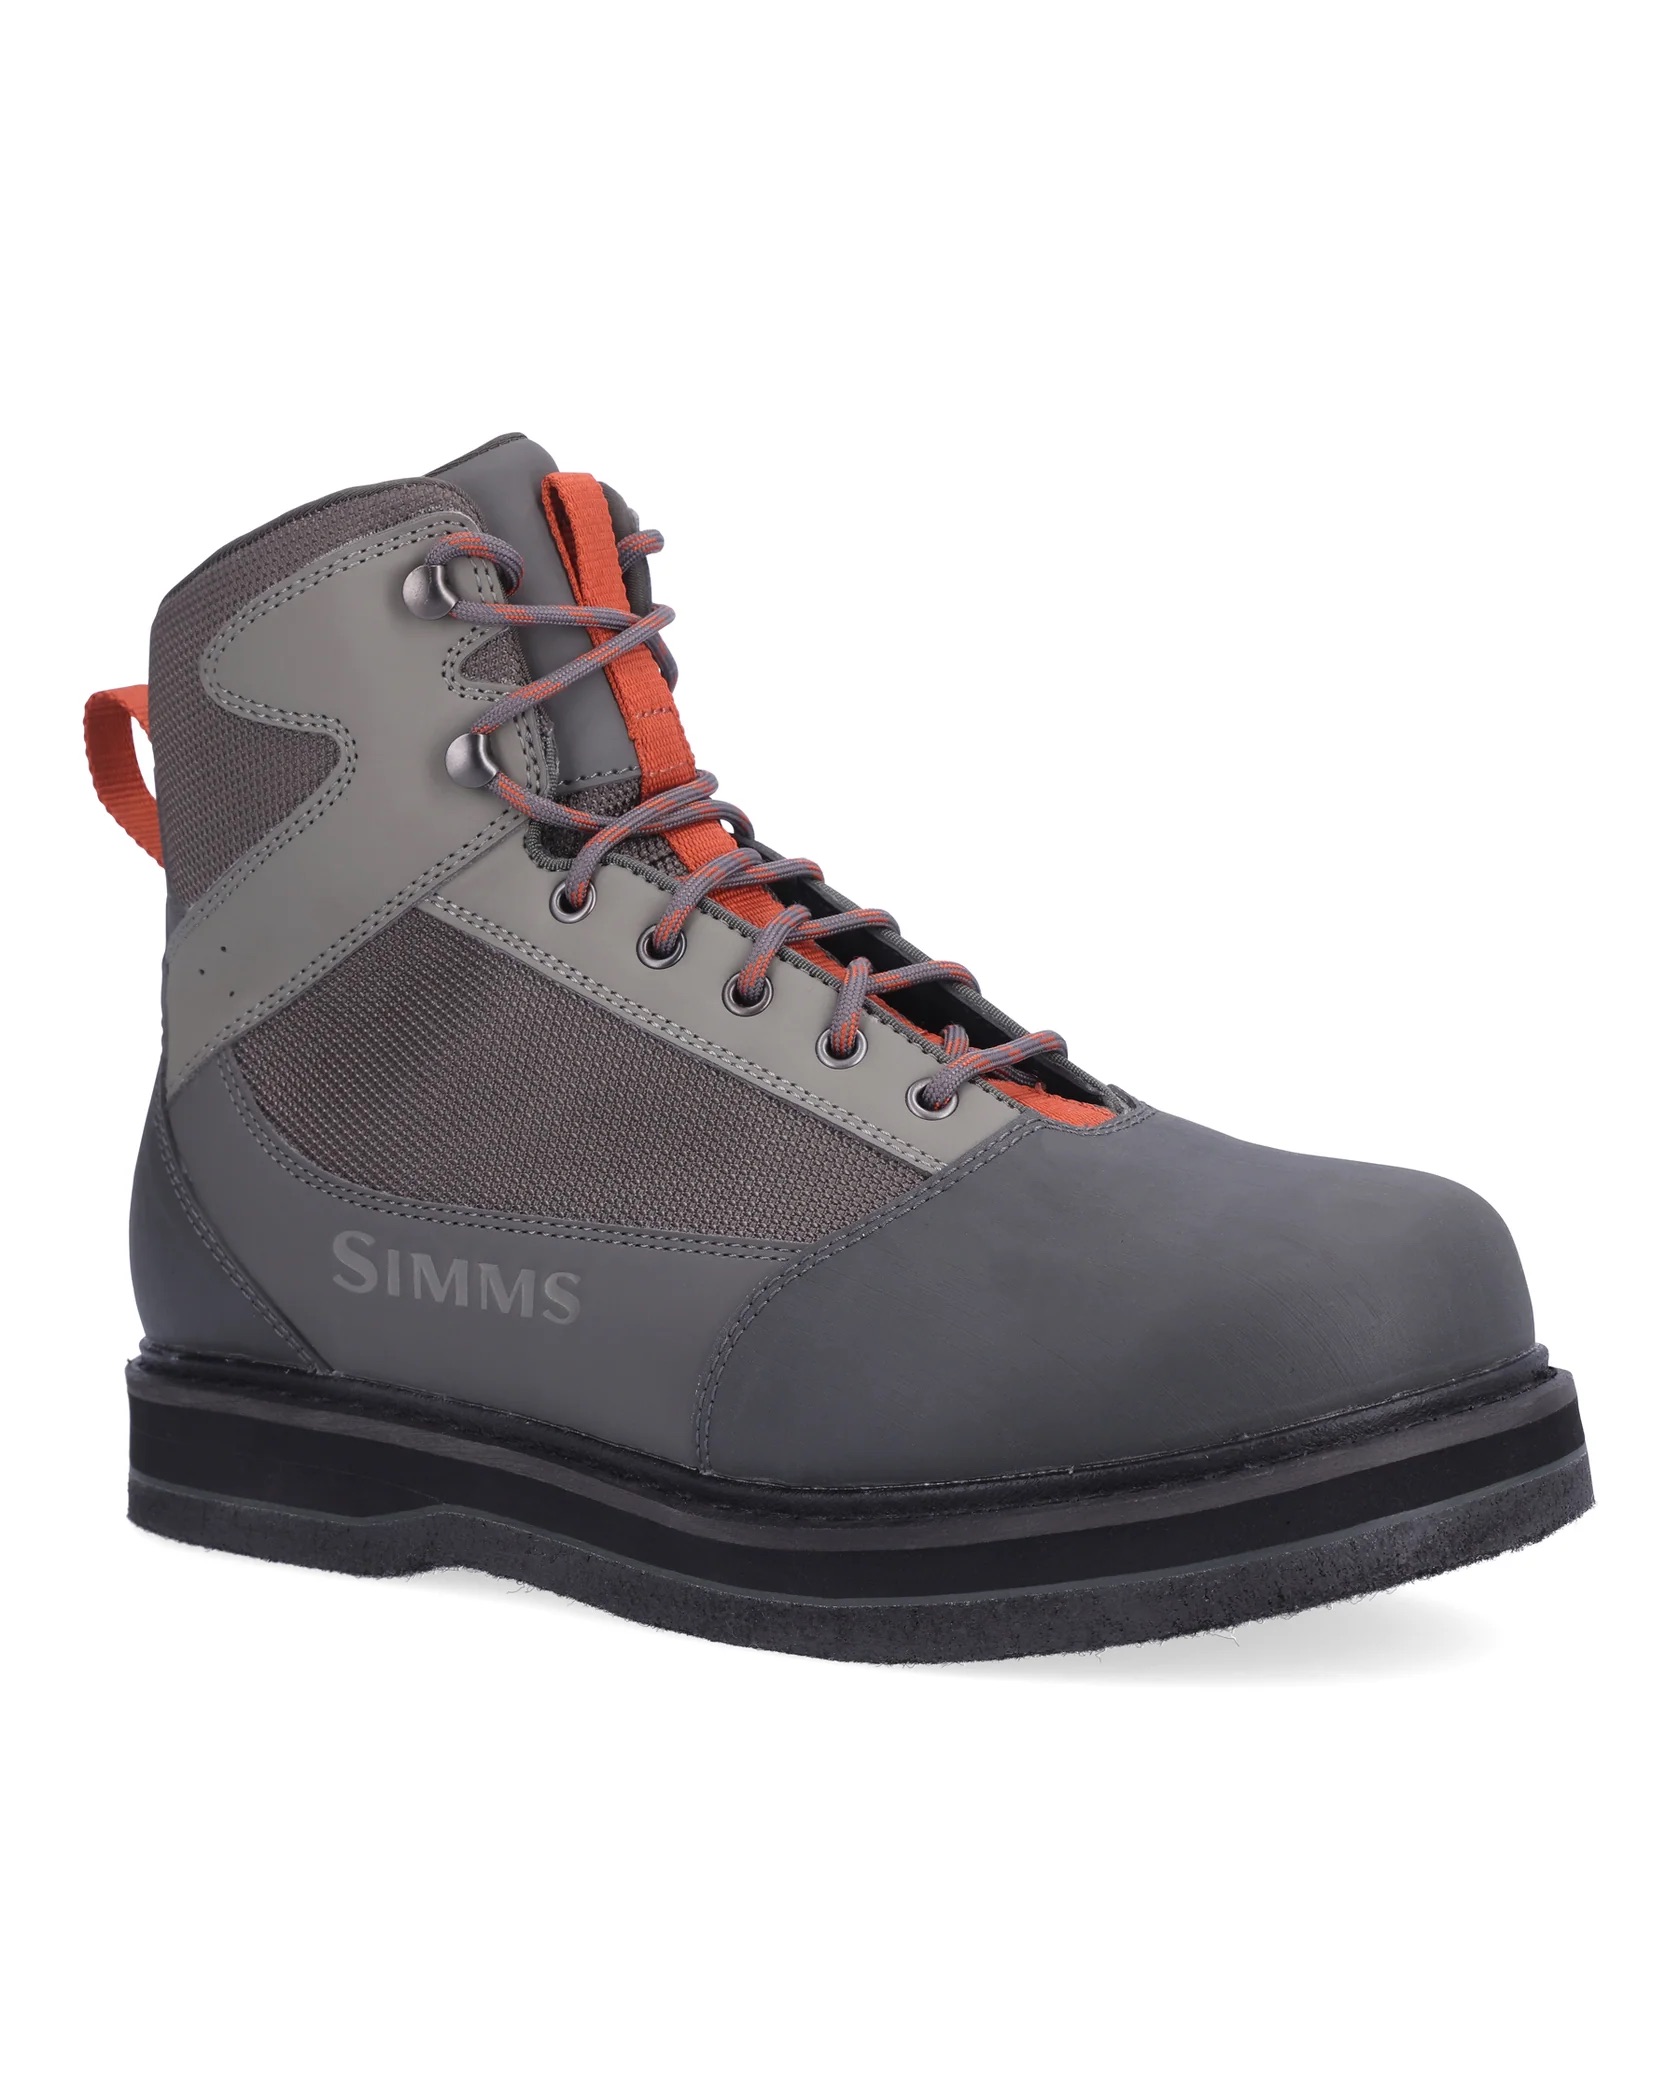 Simms Tributary Wading Boot - Felt - Size 10